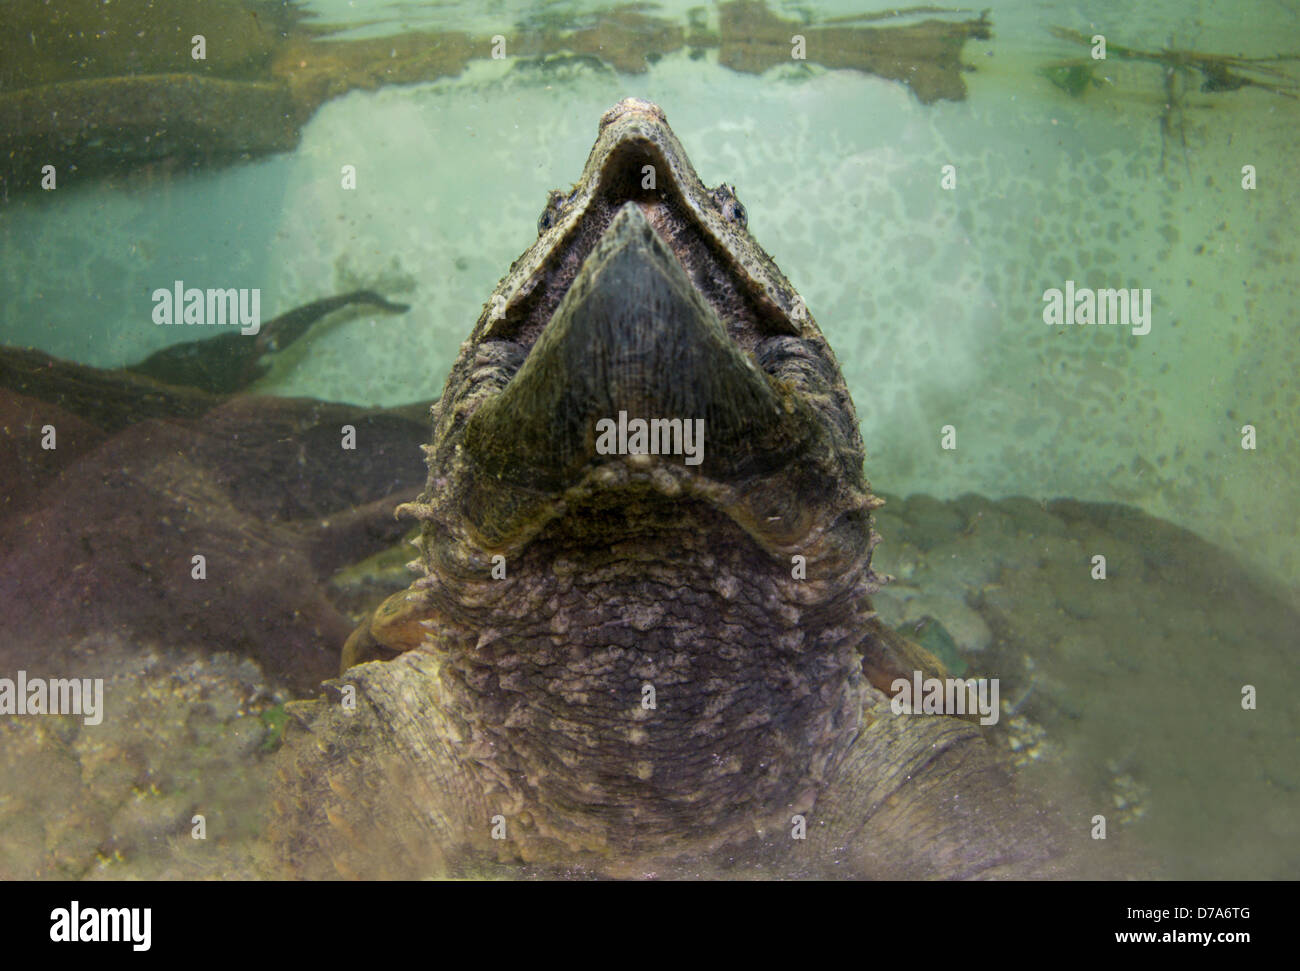 Alligator Snapping turtle Macrochelys temminckii Found in Mississippi River its tributaries throughout Southeastern U.S A Stock Photo